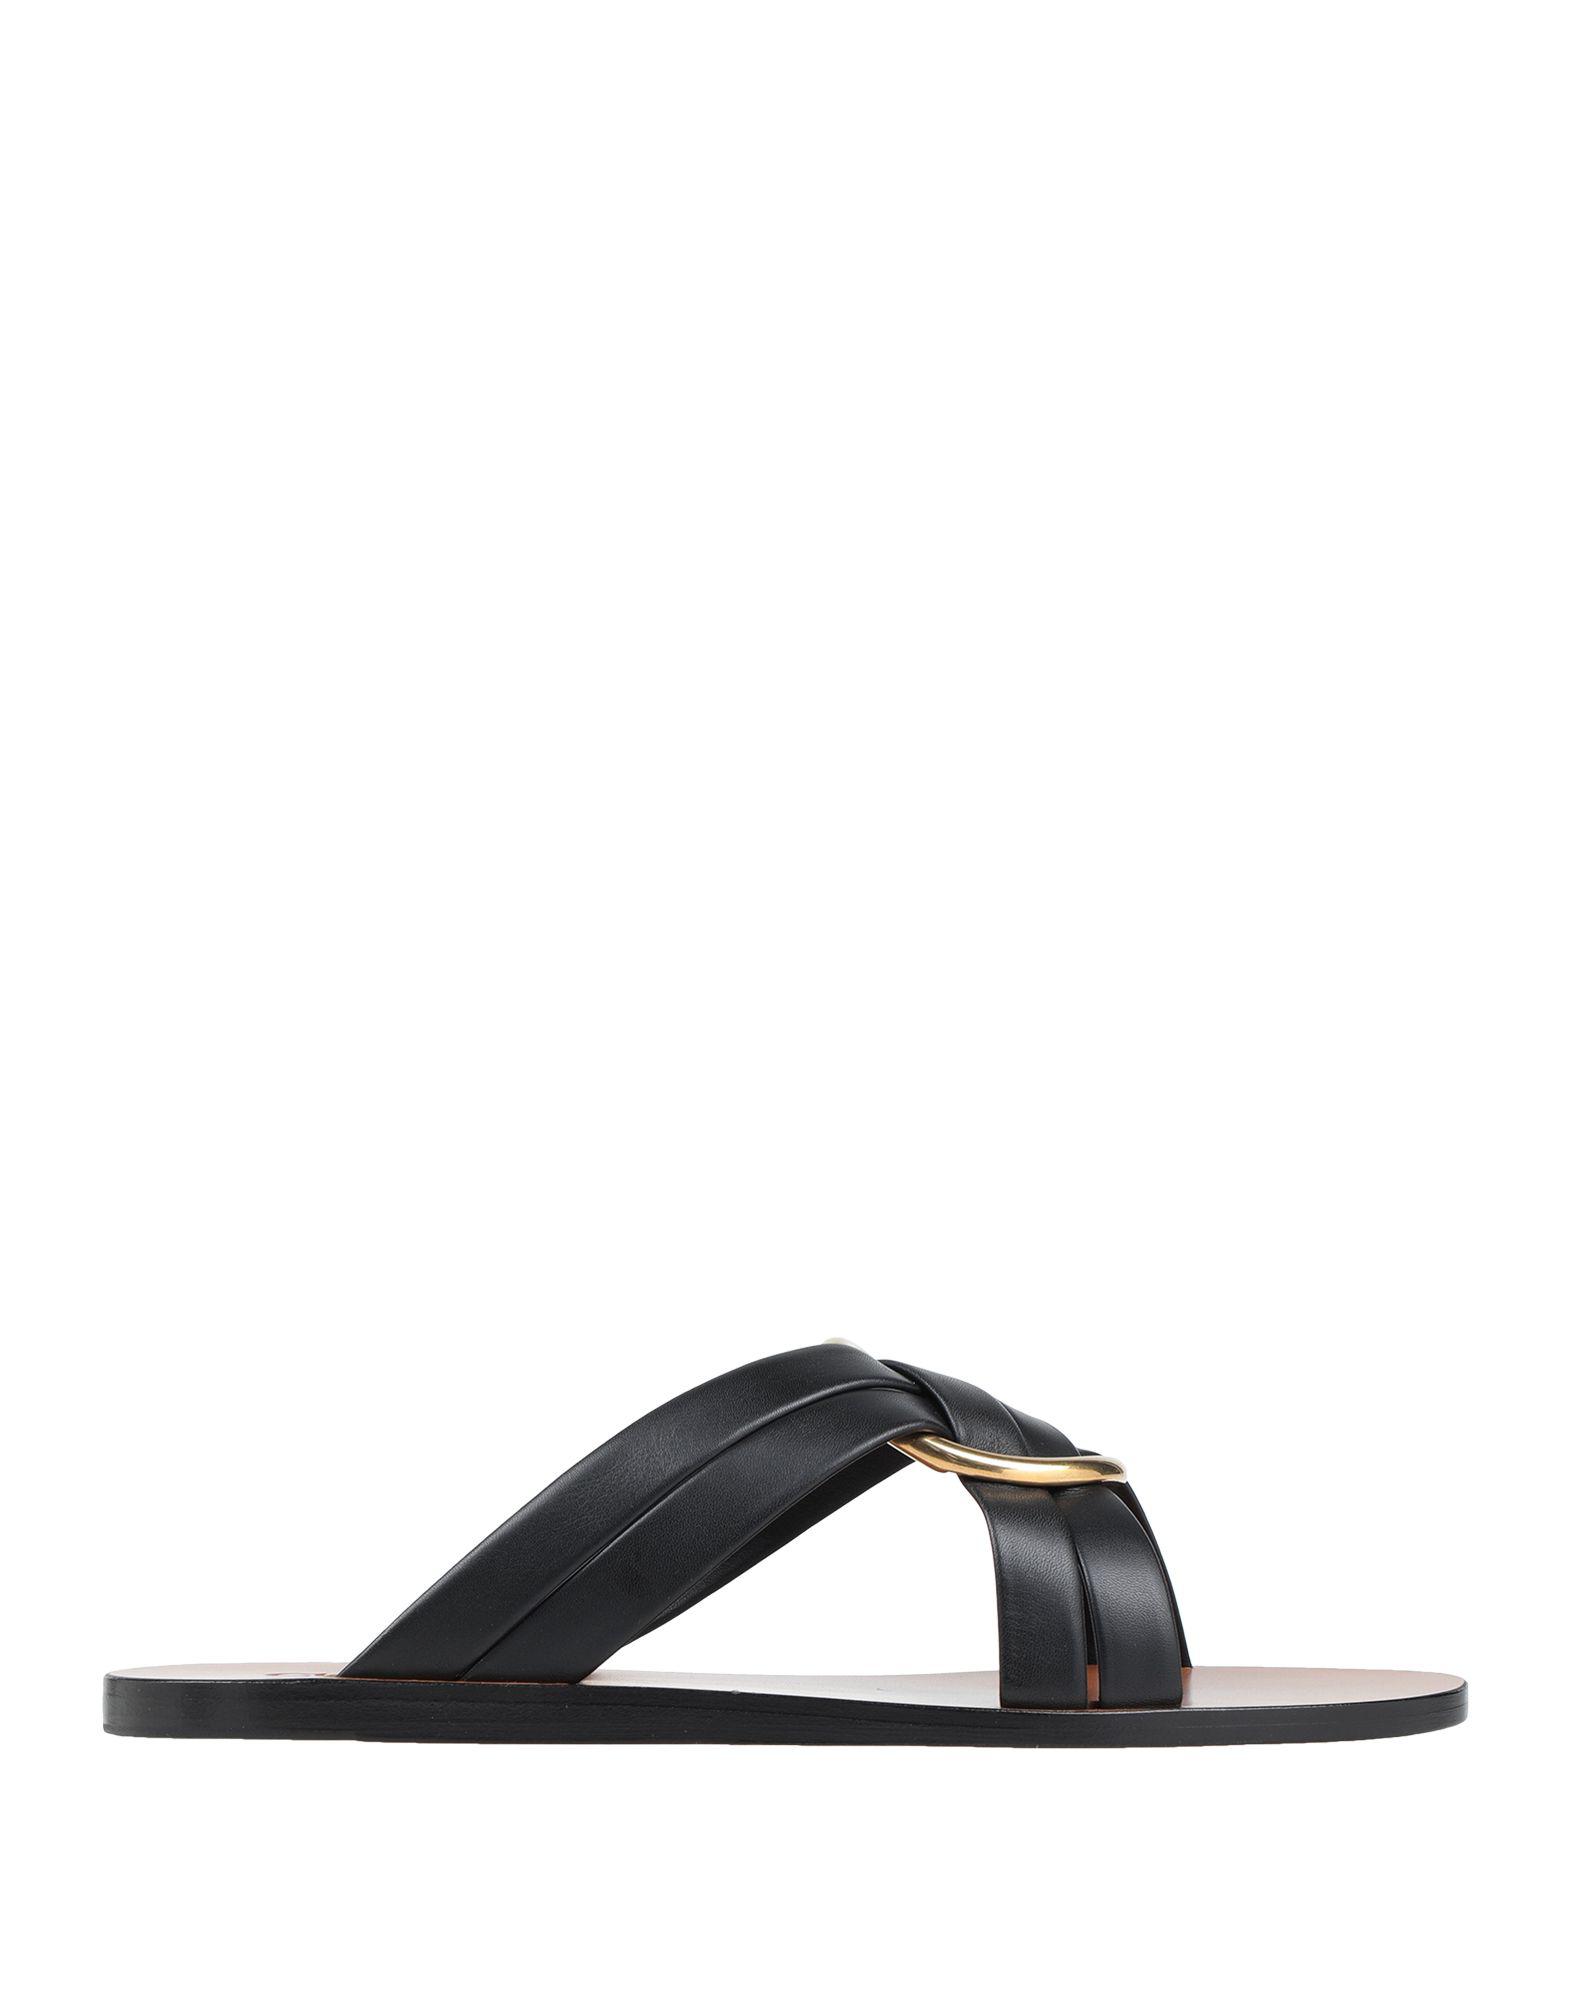 Chloé Leather Sandals in Black - Lyst